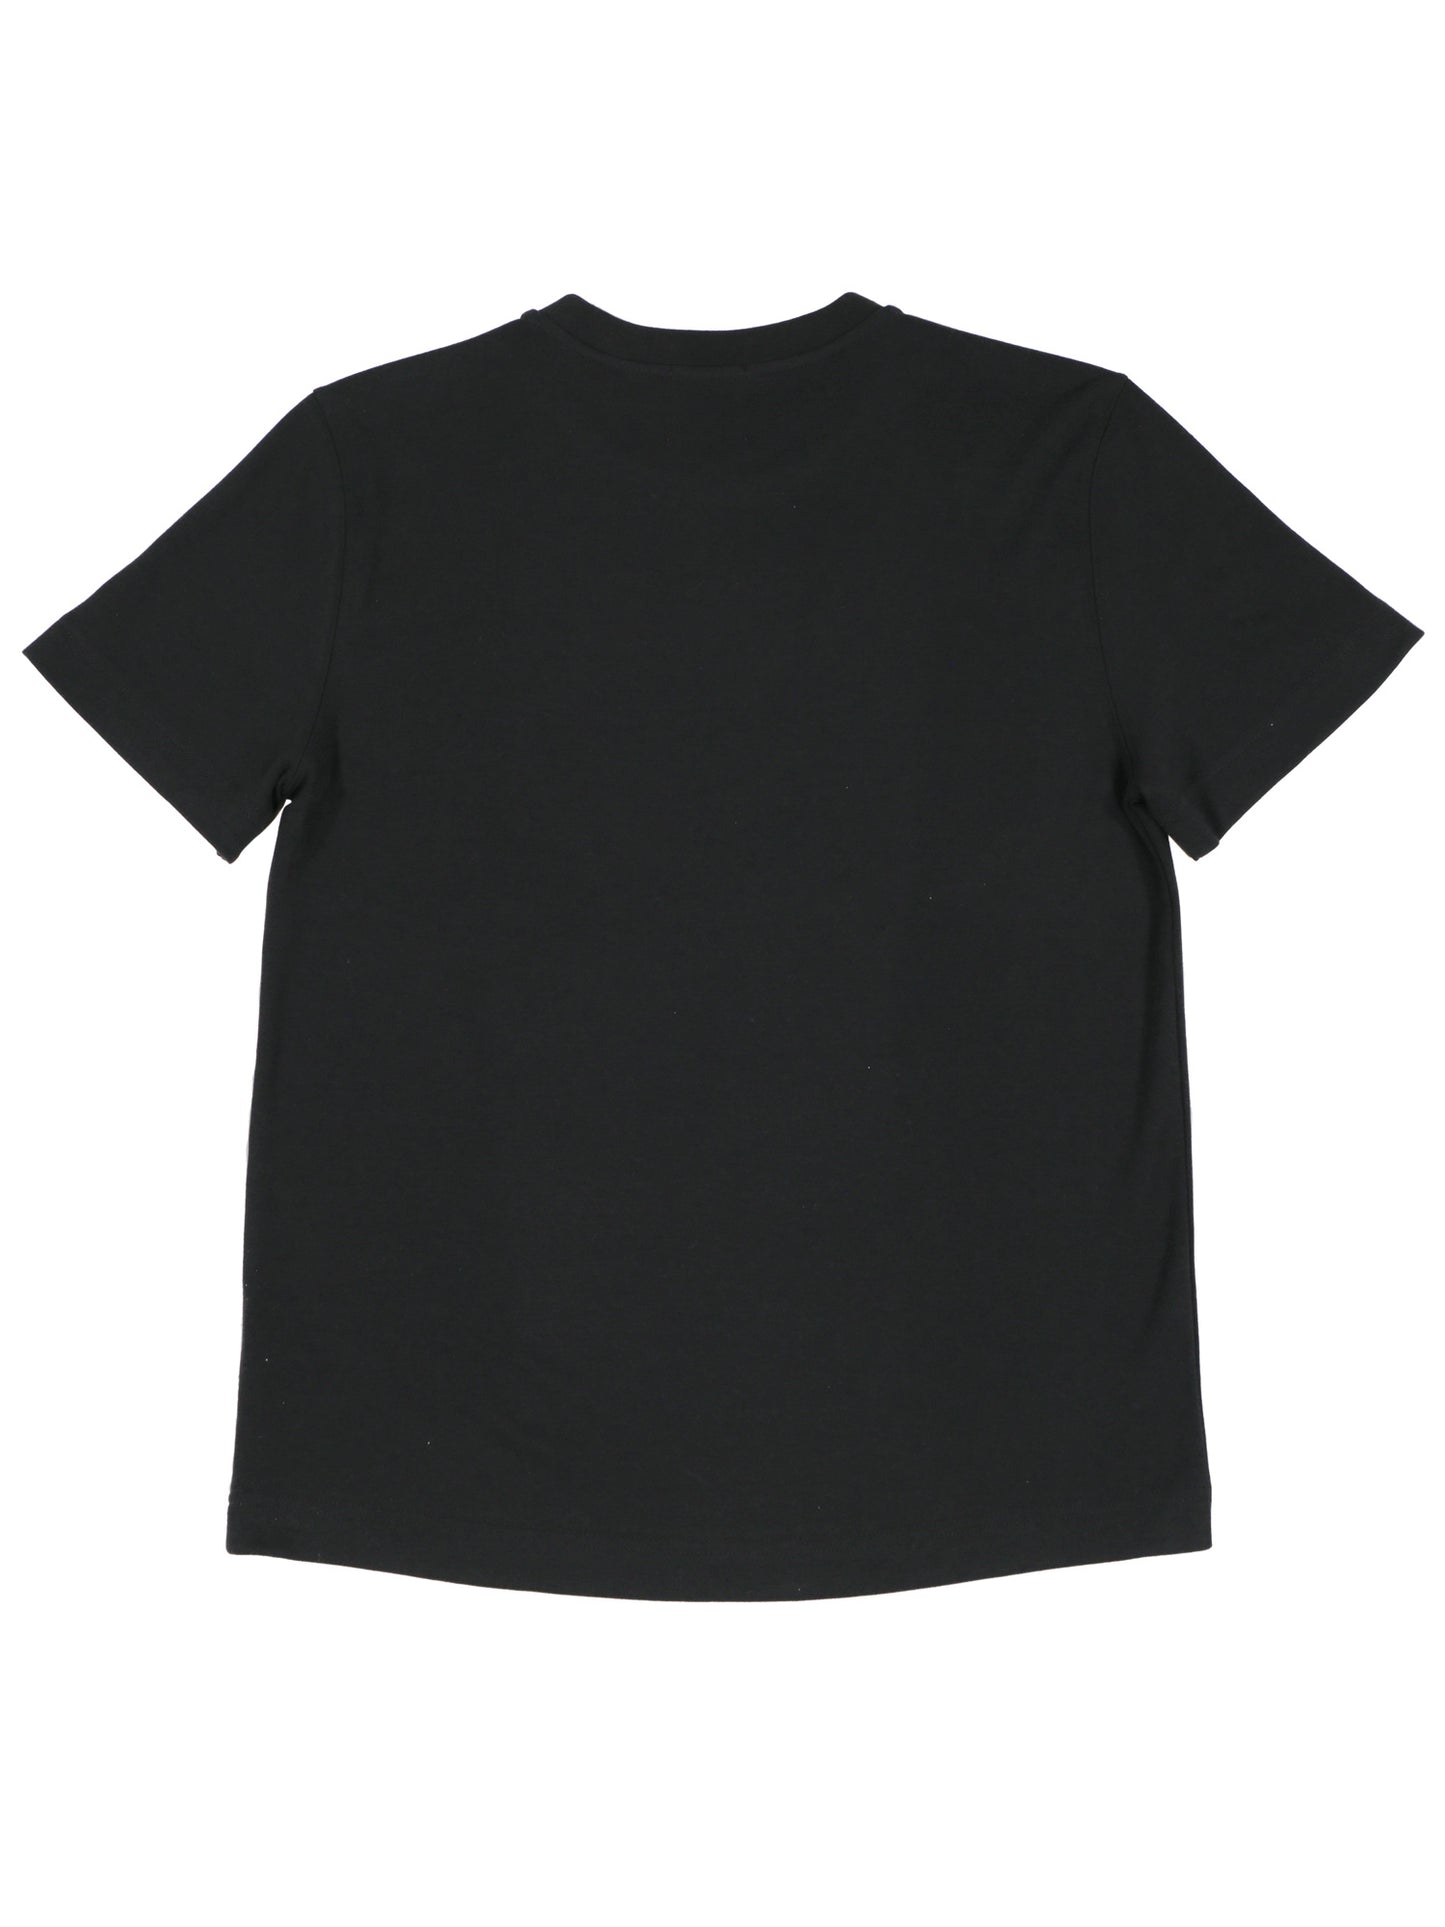 Regular Fitted Basic Tee shirts